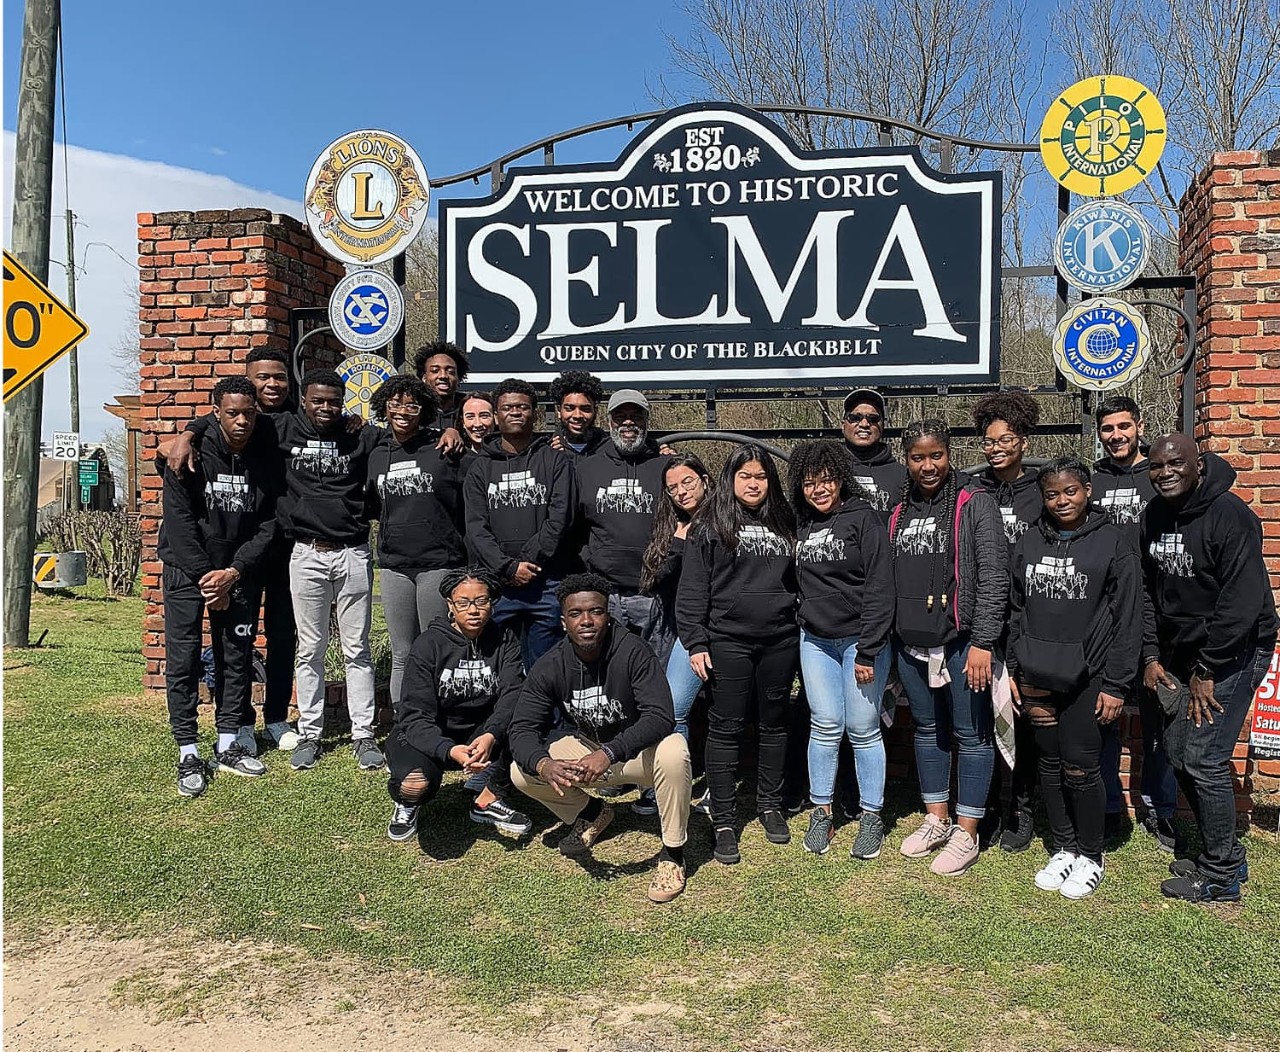 A group photo of students in front of the Selma, Alabama sign